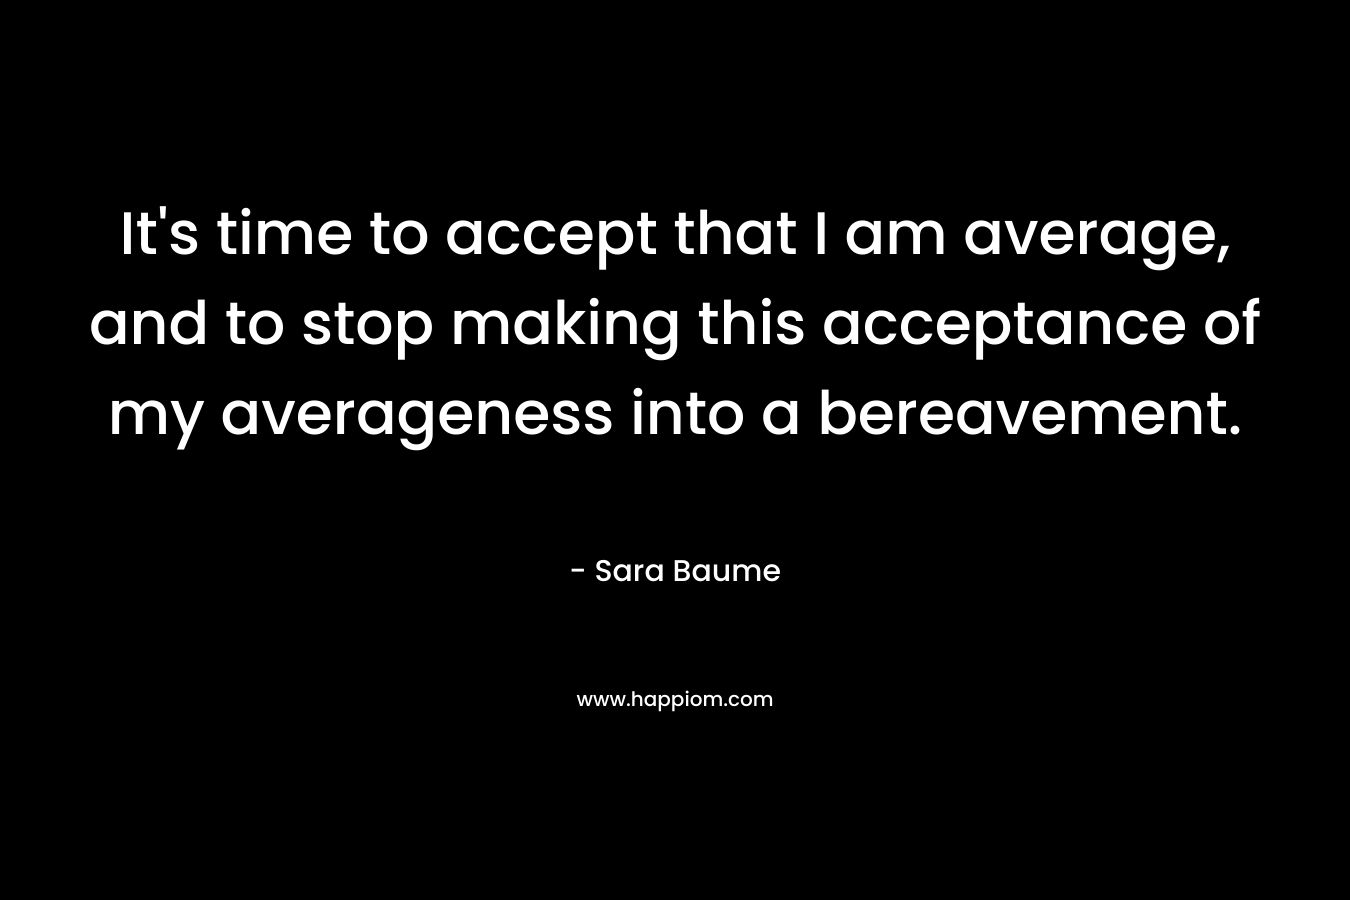 It's time to accept that I am average, and to stop making this acceptance of my averageness into a bereavement.